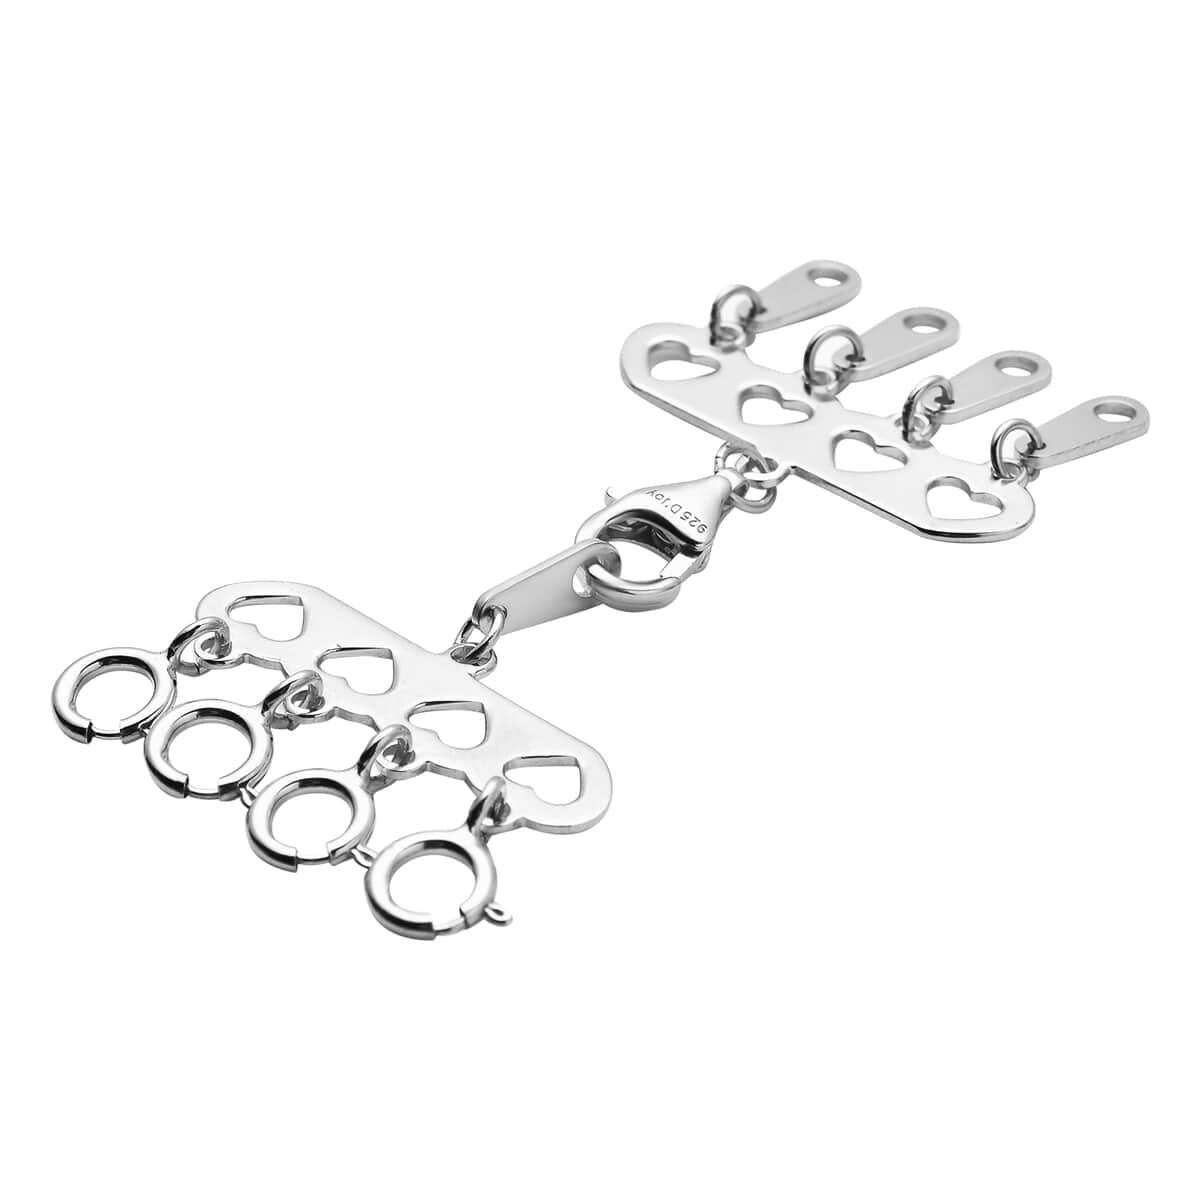 4 Row Hearts Layering Lock in Rhodium Over Sterling Silver with 9mm Lobster Lock and 4pcs 5mm Spring Locks | Jewelry Spring Lock image number 3